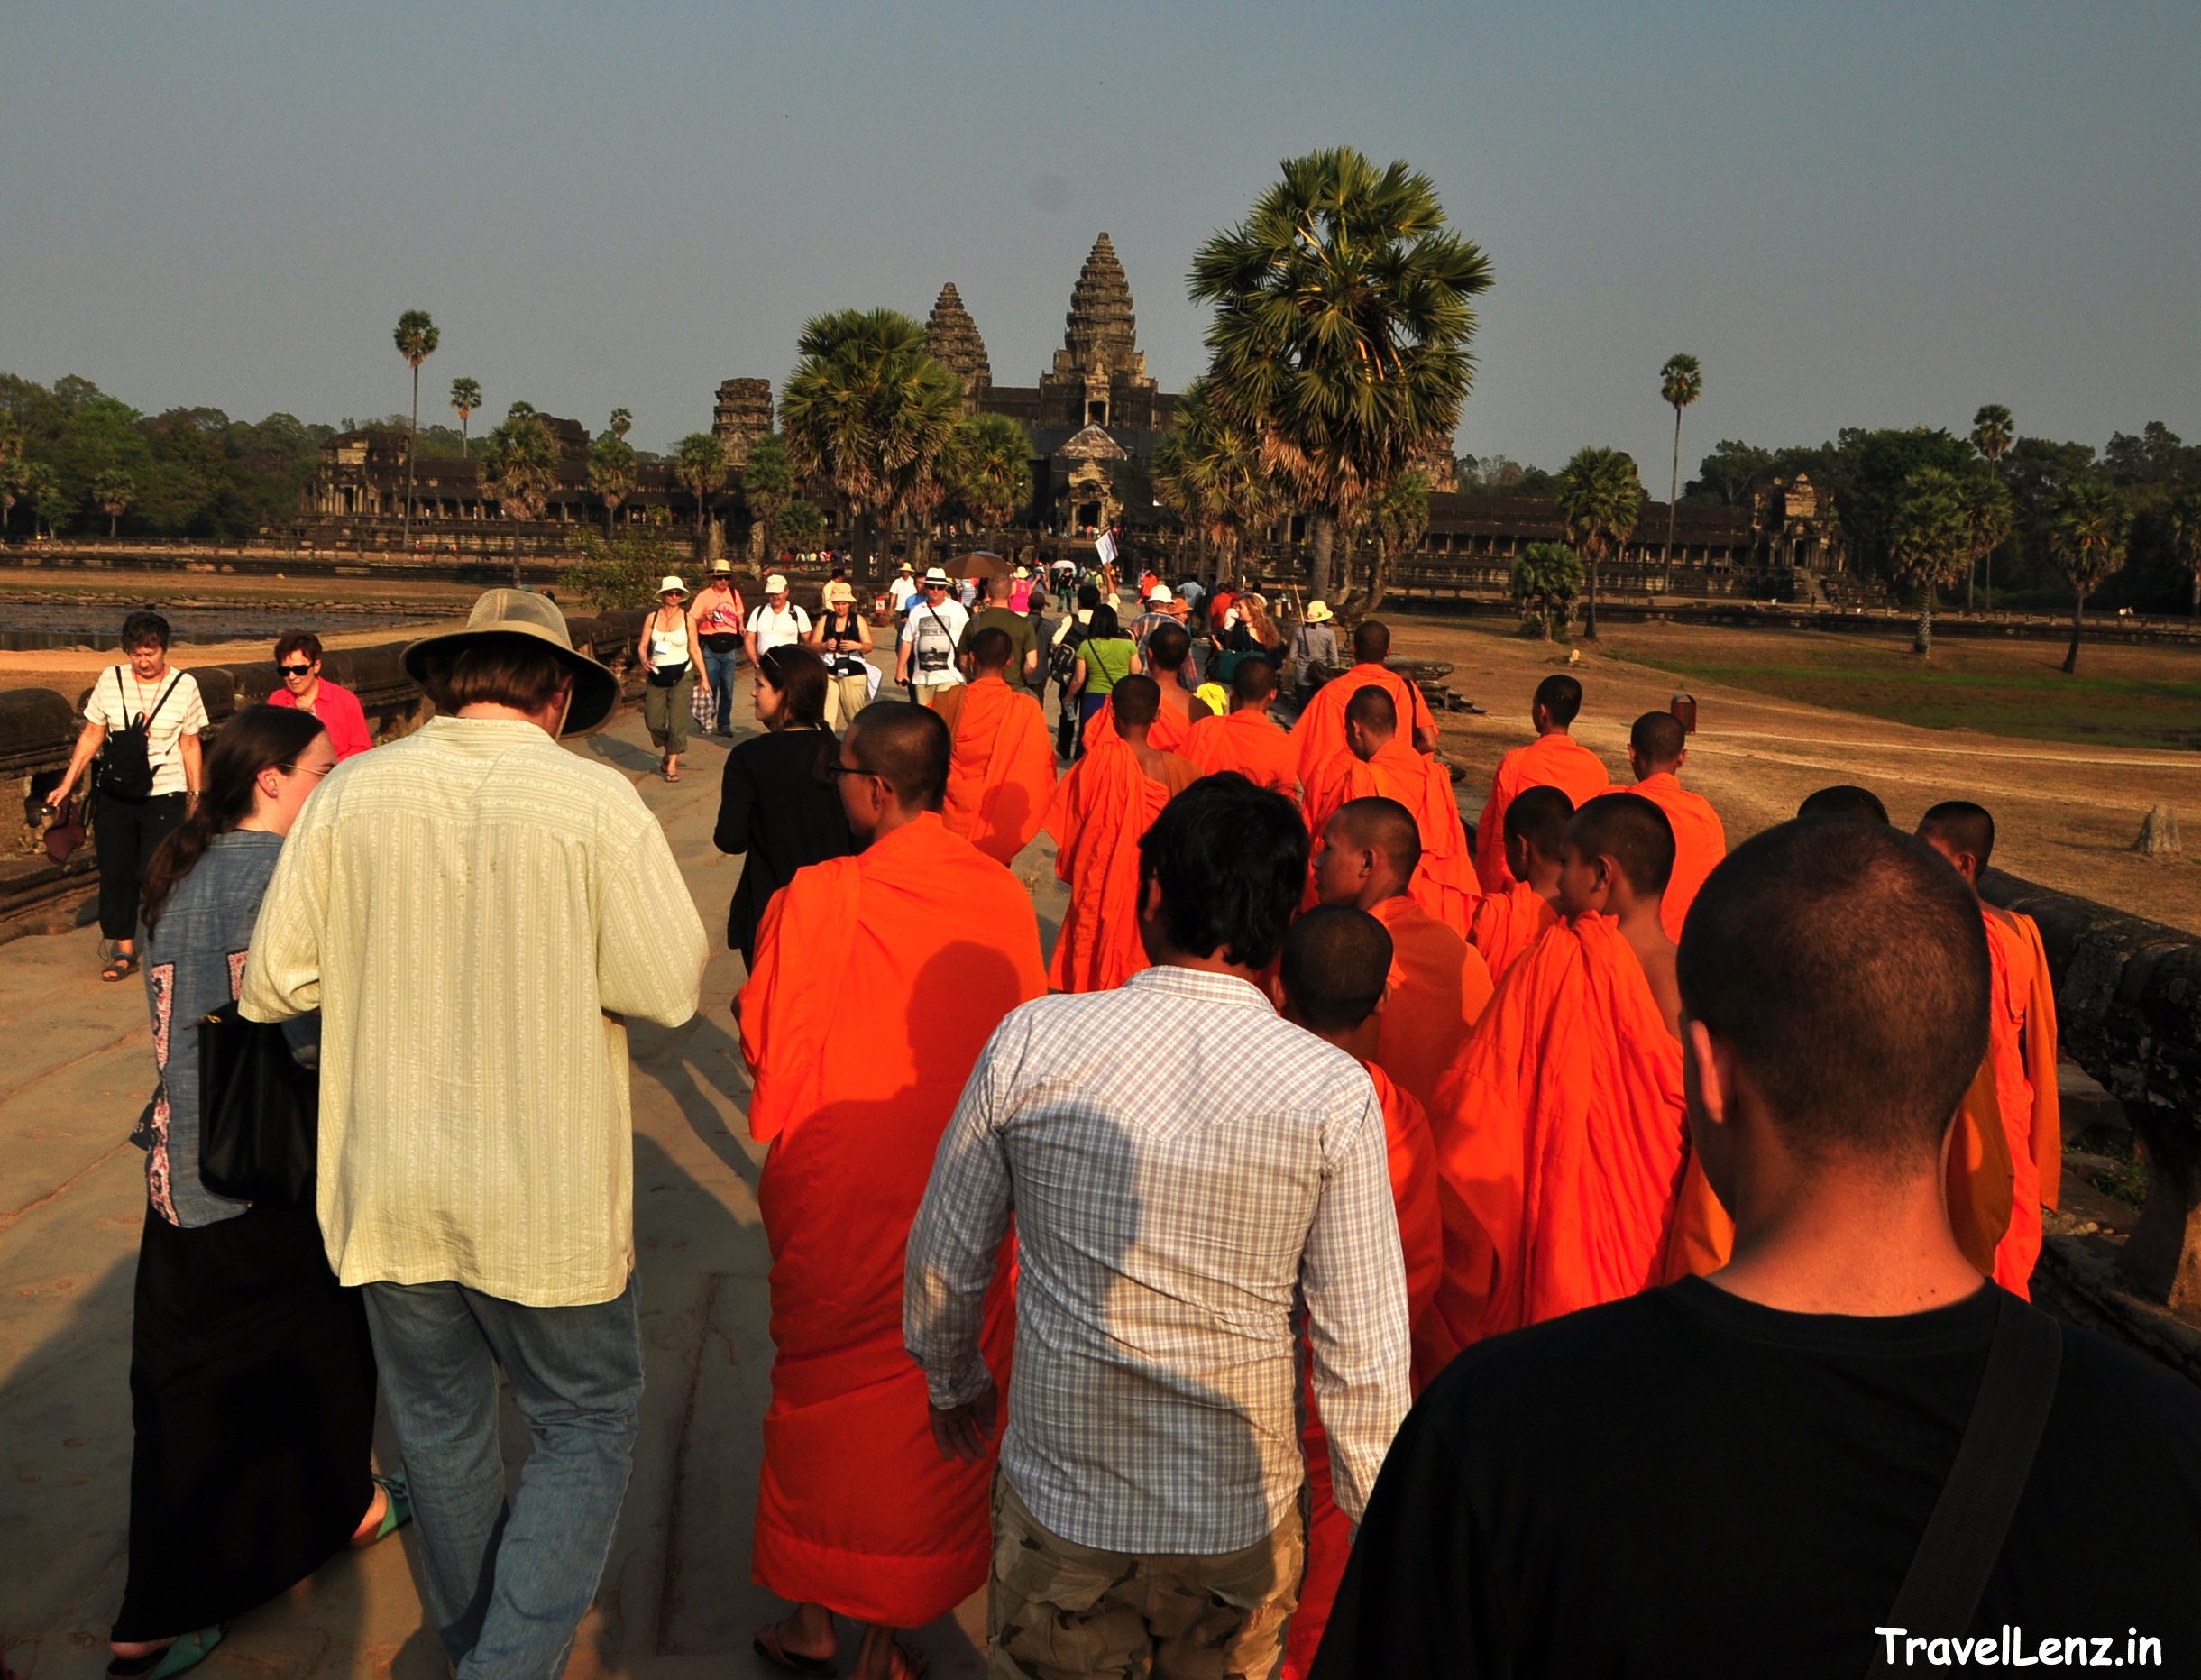 Monks in their colorful orange robes standing out in the crowd